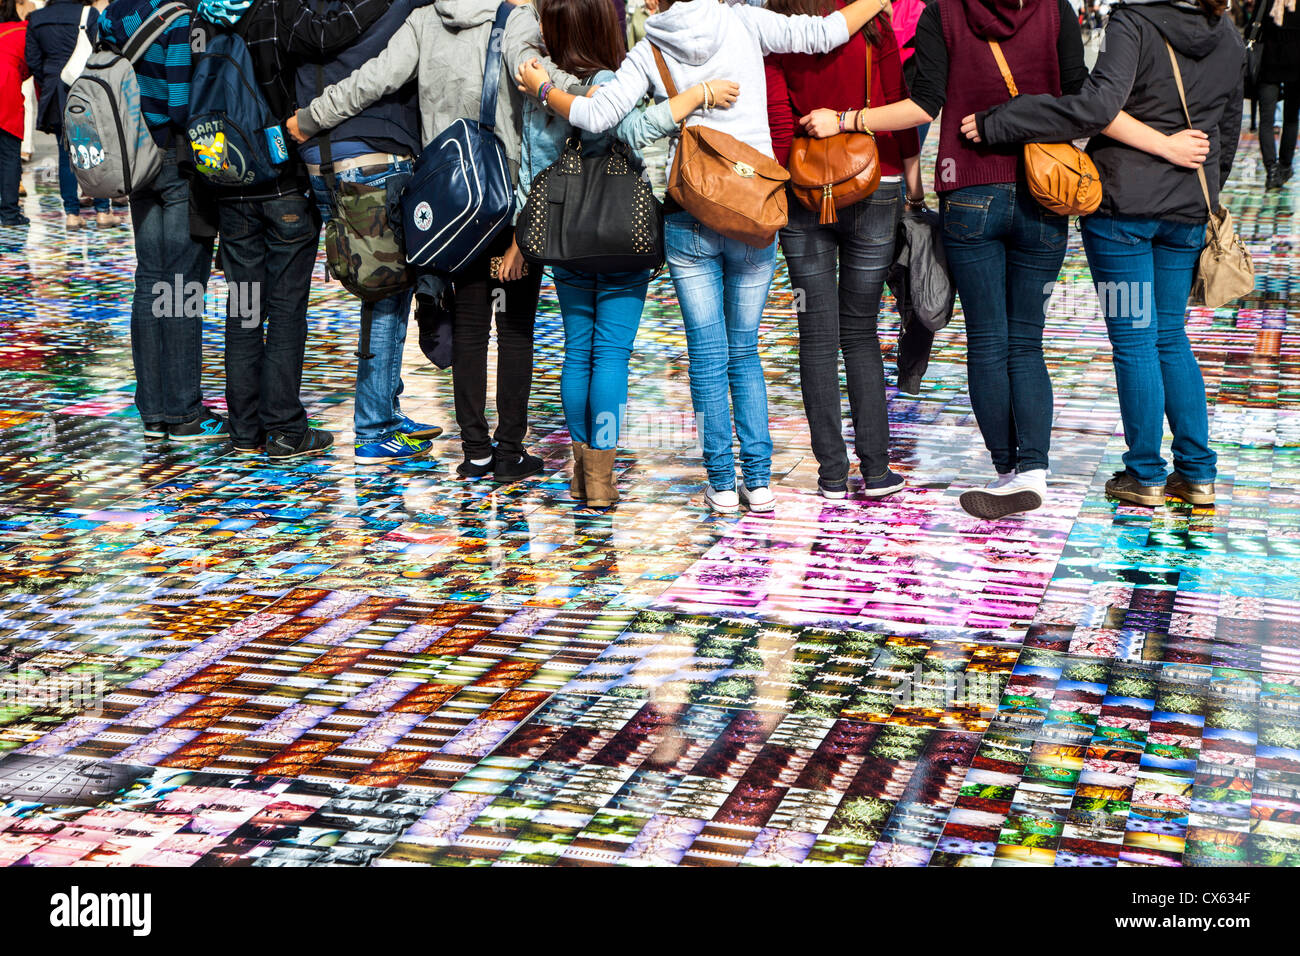 Photokina, worlds leading imaging fair, trade show for photography. Big installation of Lomography photos on the floor. Stock Photo